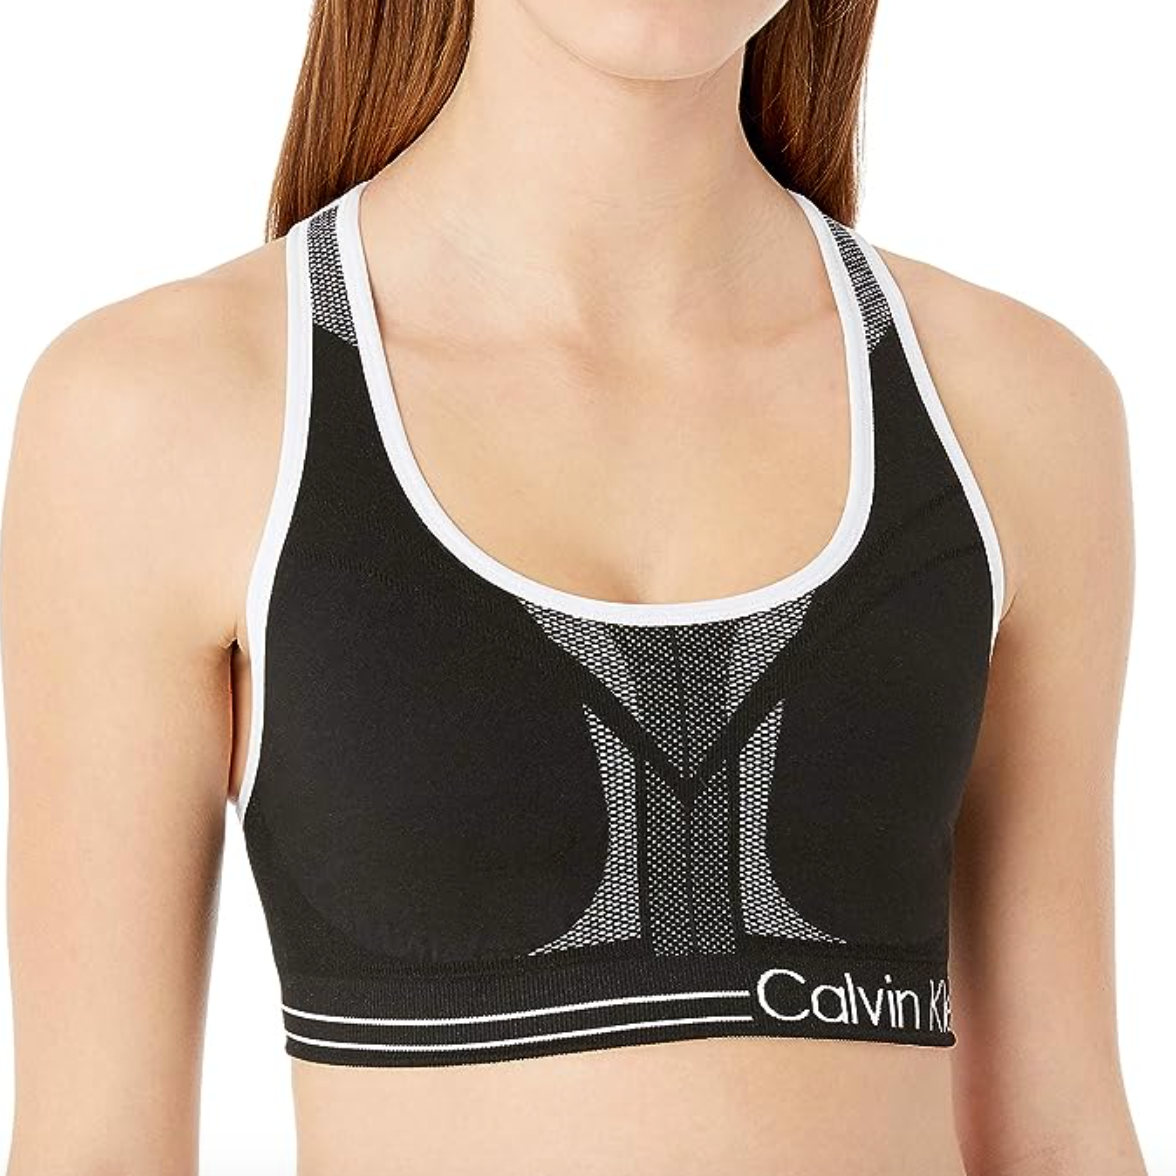 and Women Underwear Iconic Calvin Amazon Tonight | to Right Men Entertainment Is at Up Now 60% for Off Klein\'s